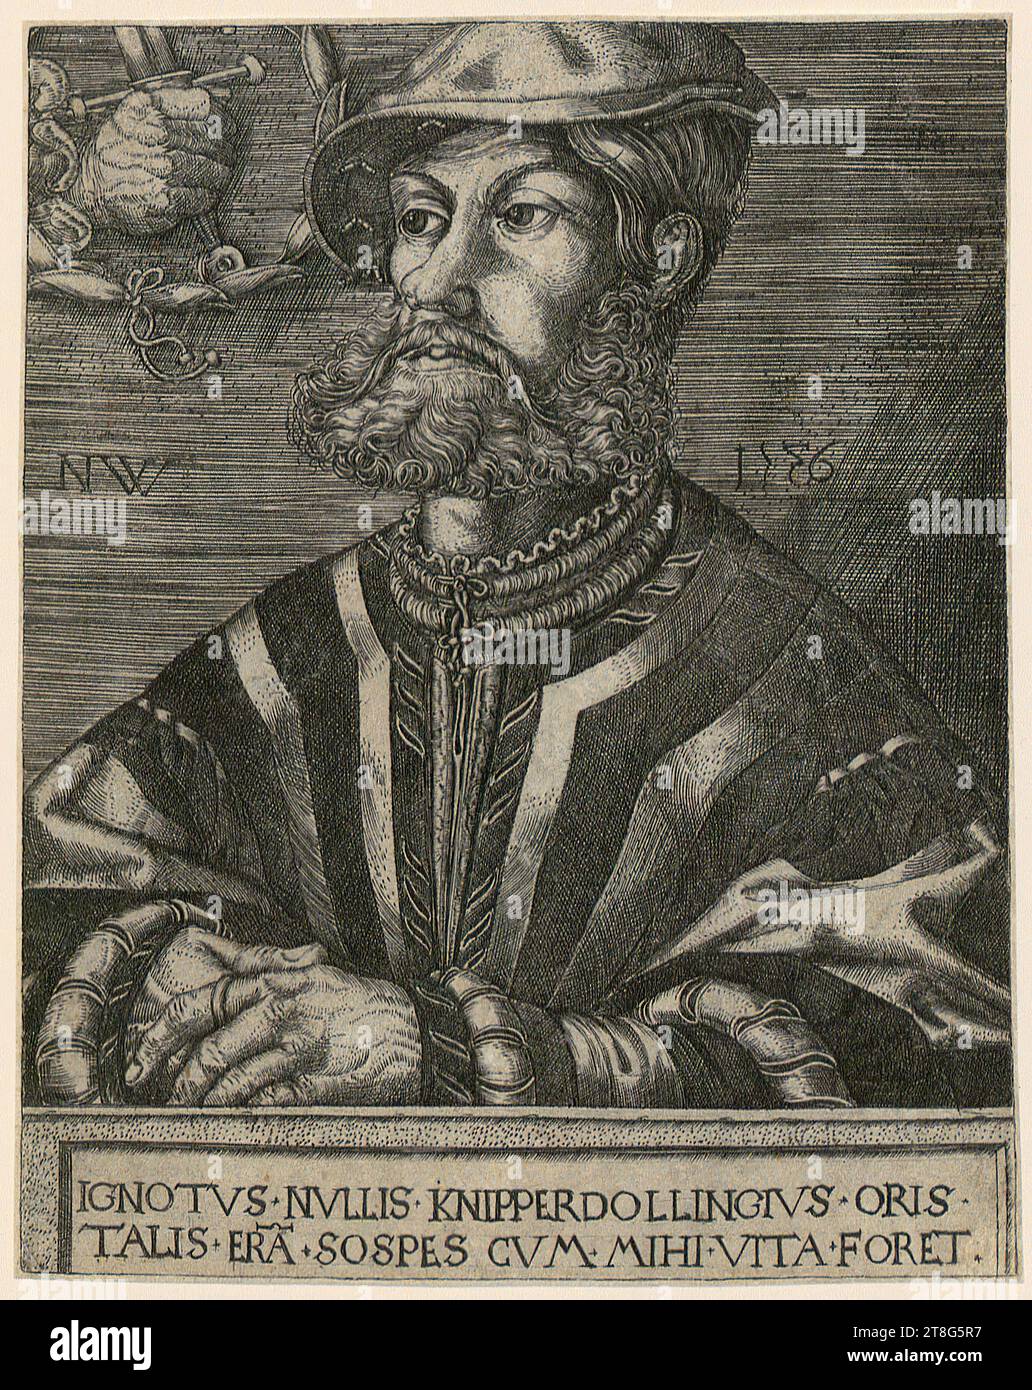 Nicolaus Wilborn (1531, 1538 mentioned around), engraver Heinrich Aldegrever (1502 - 1555, 1561), copy after, portrait of Bernt Knipperdolling, origin of print: 1536, copper engraving, sheet size: 13.4 x 10.8 cm (top and bottom trimmed)' Field3 monogrammed 'NW' at center left, dated '1536' at center right, and inscribed 'IGNOTVS NVLLUIS KN' at bottom Stock Photo